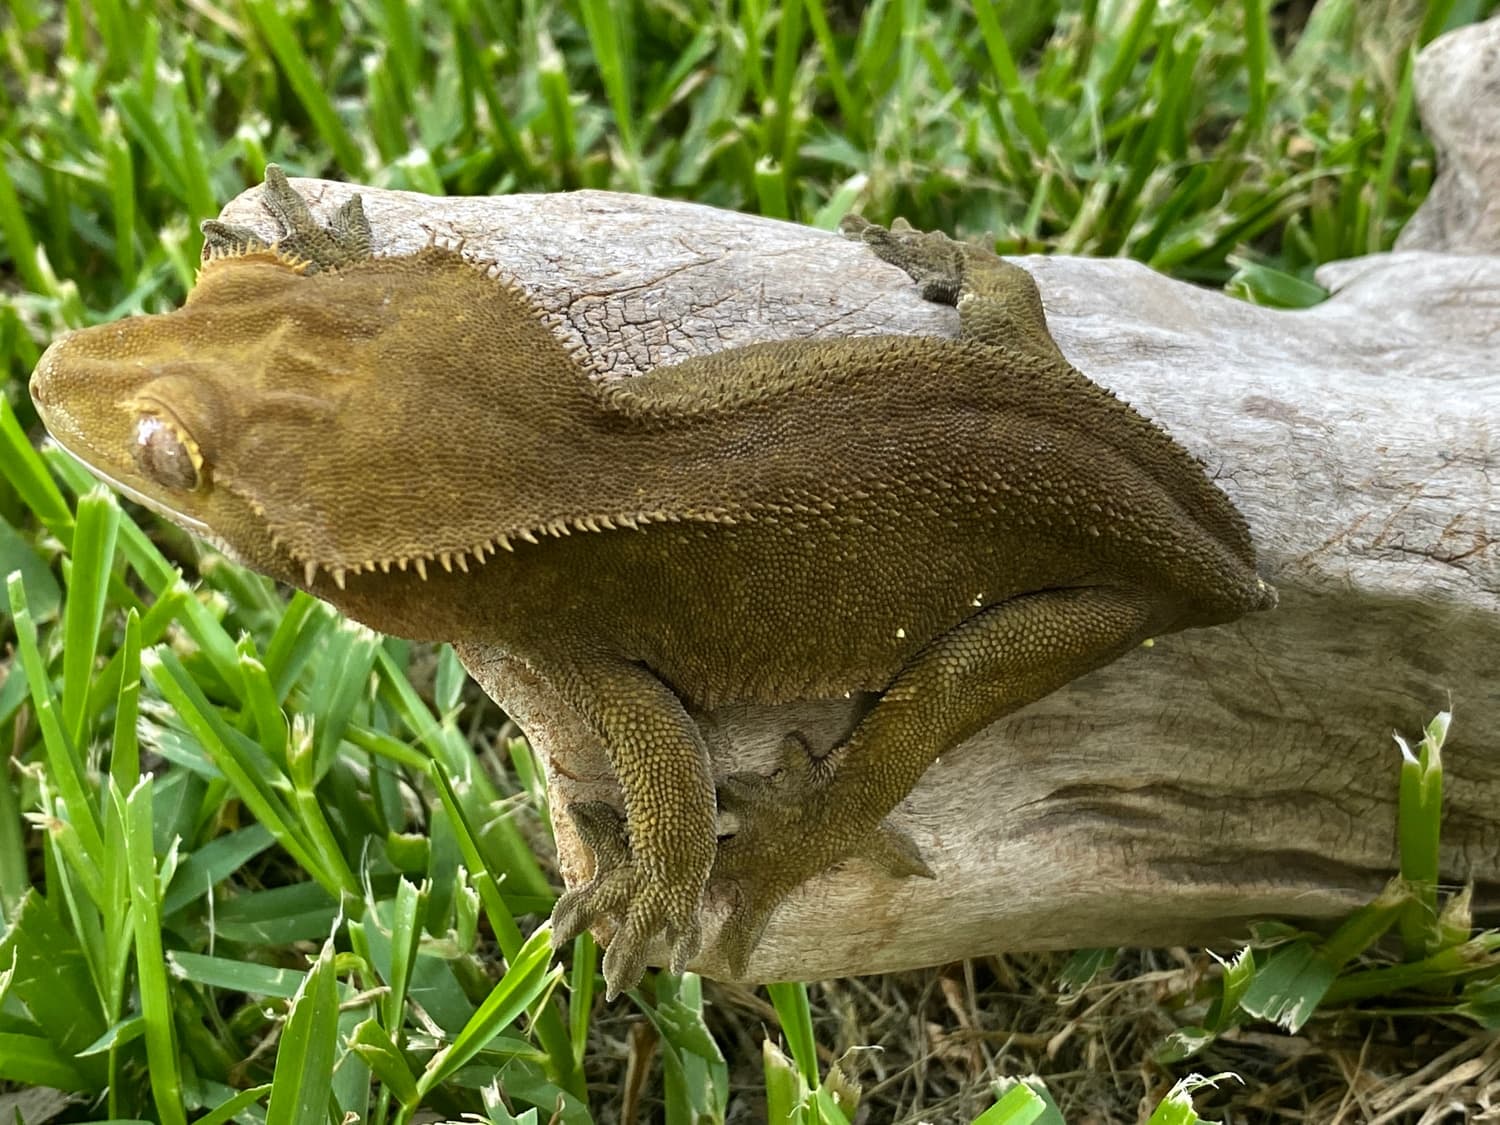 green crested gecko